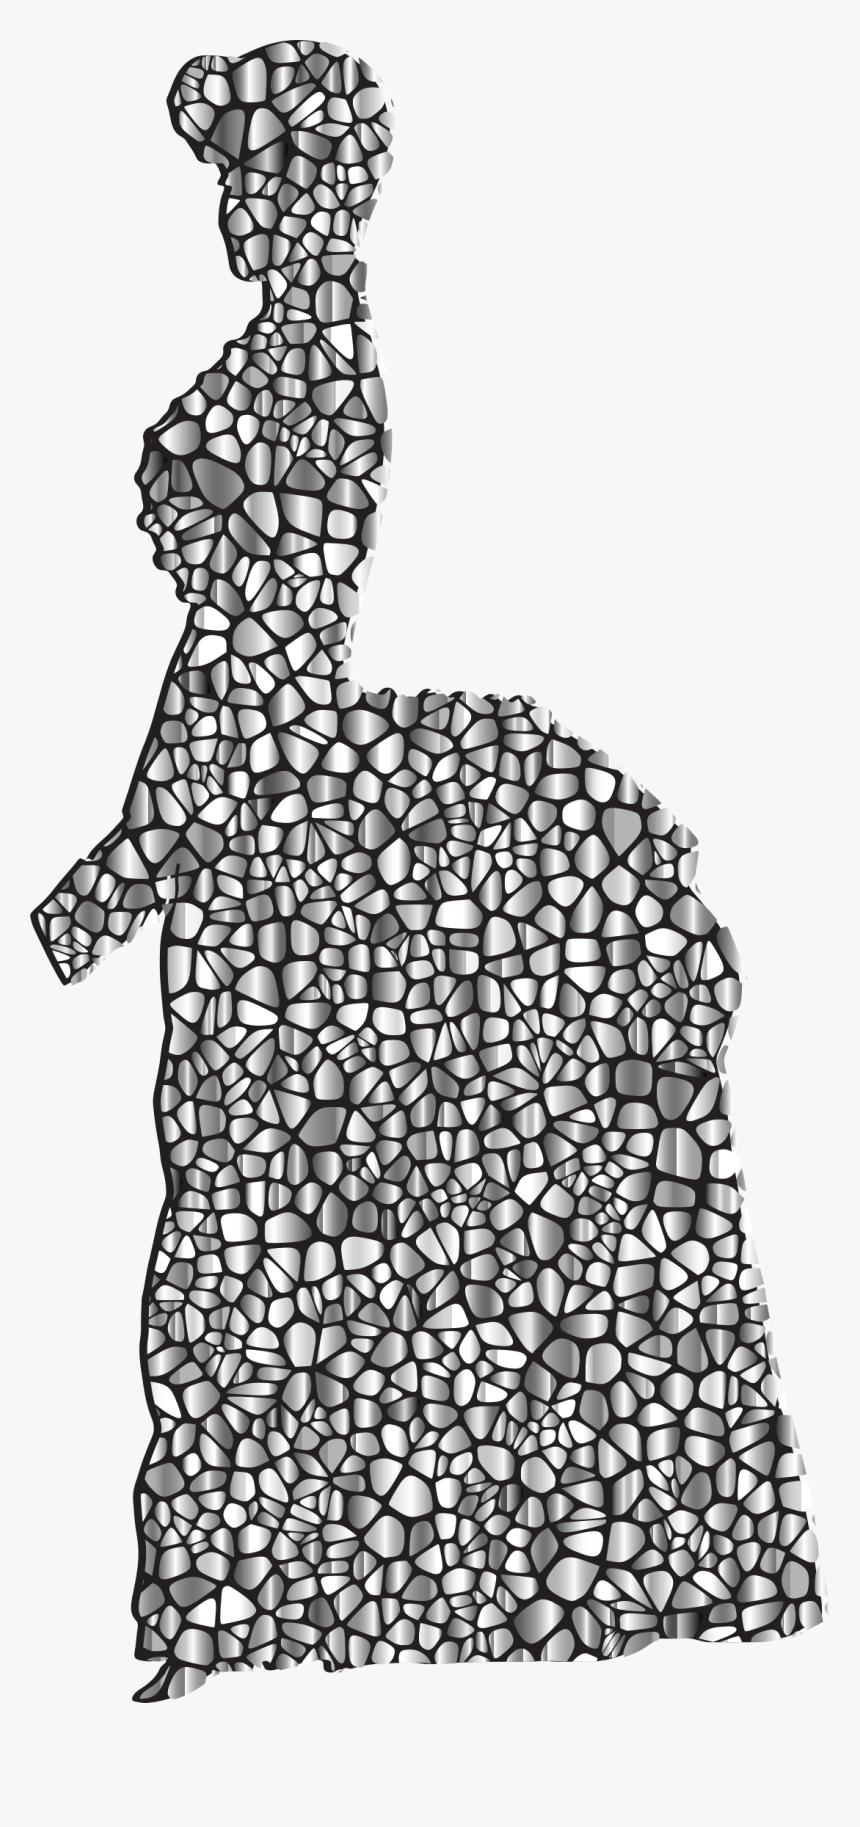 Transparent Woman In Dress Silhouette Png - Woman Silhouette Dress Victorian, Png Download, Free Download